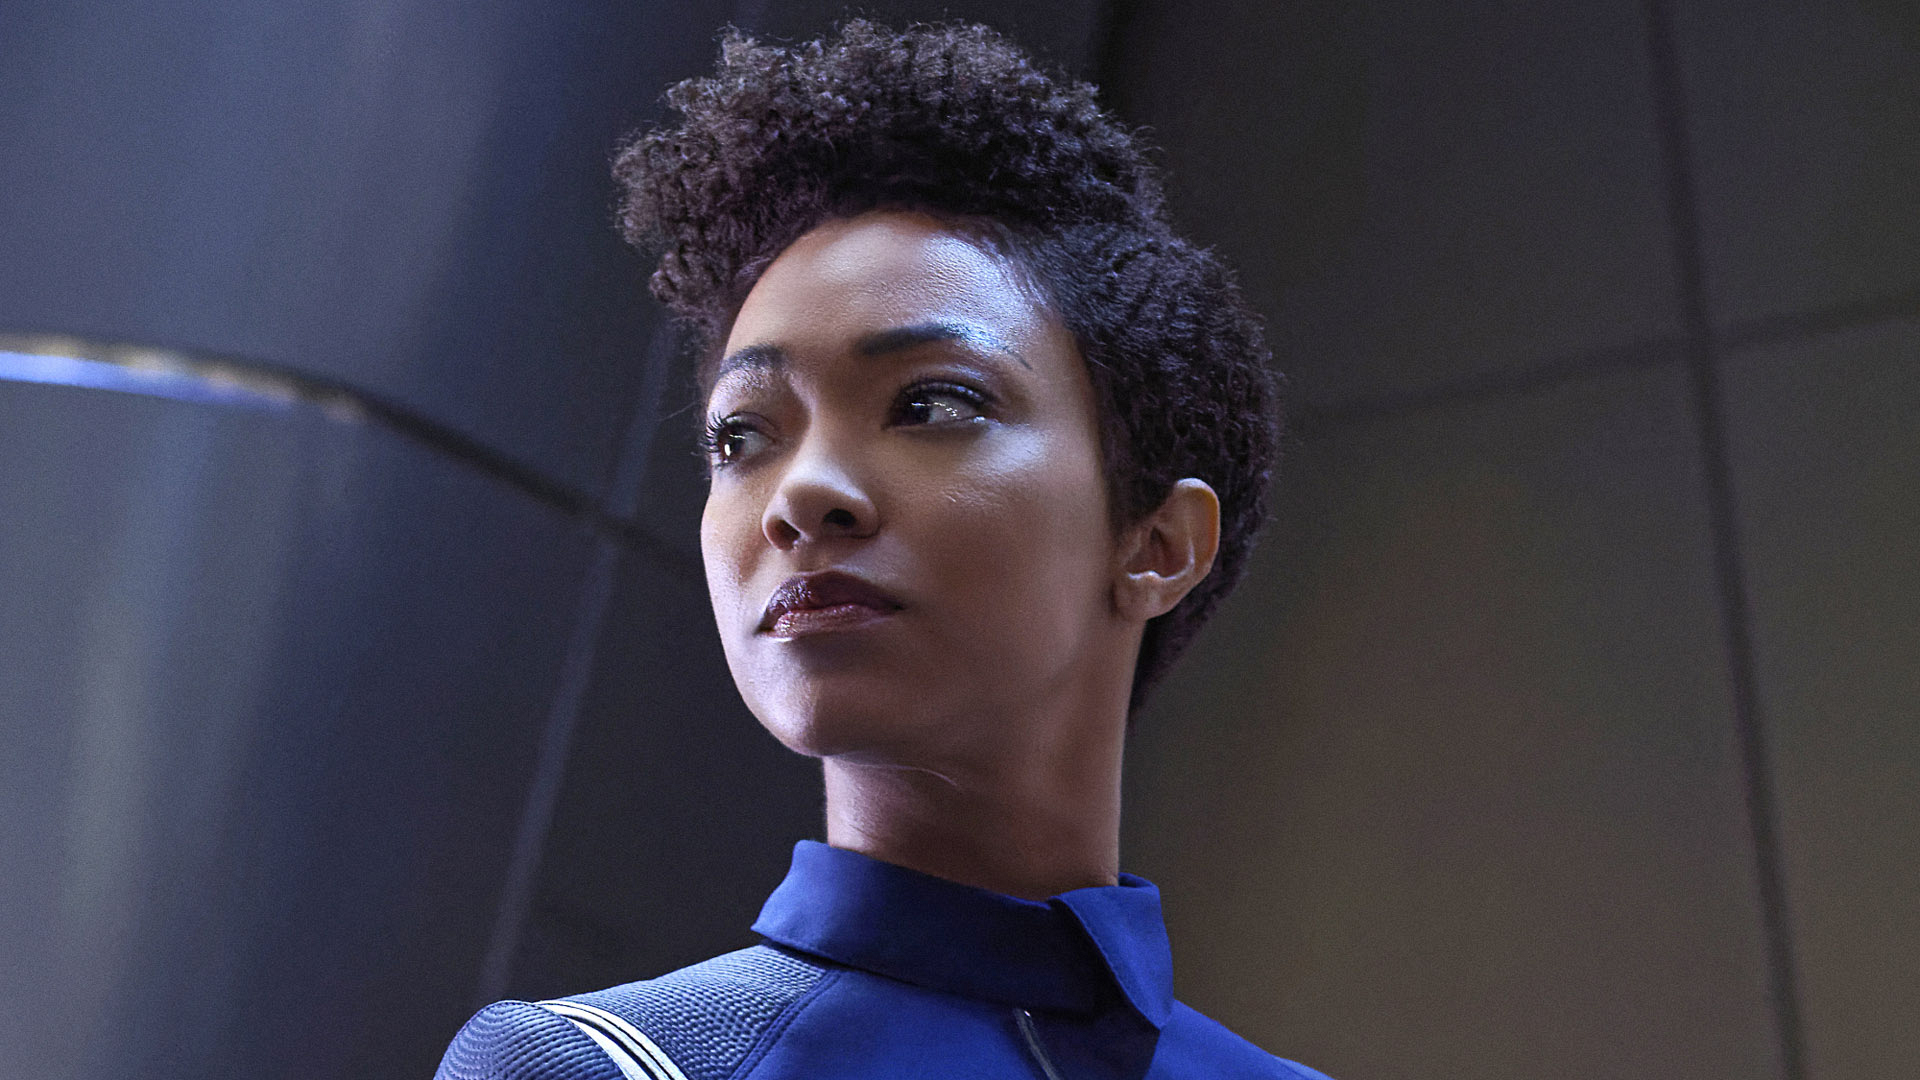 Check Out New Photos From Episode 7 Of Star Trek: Discovery - Page 7 - Star Trek ...1920 x 1080